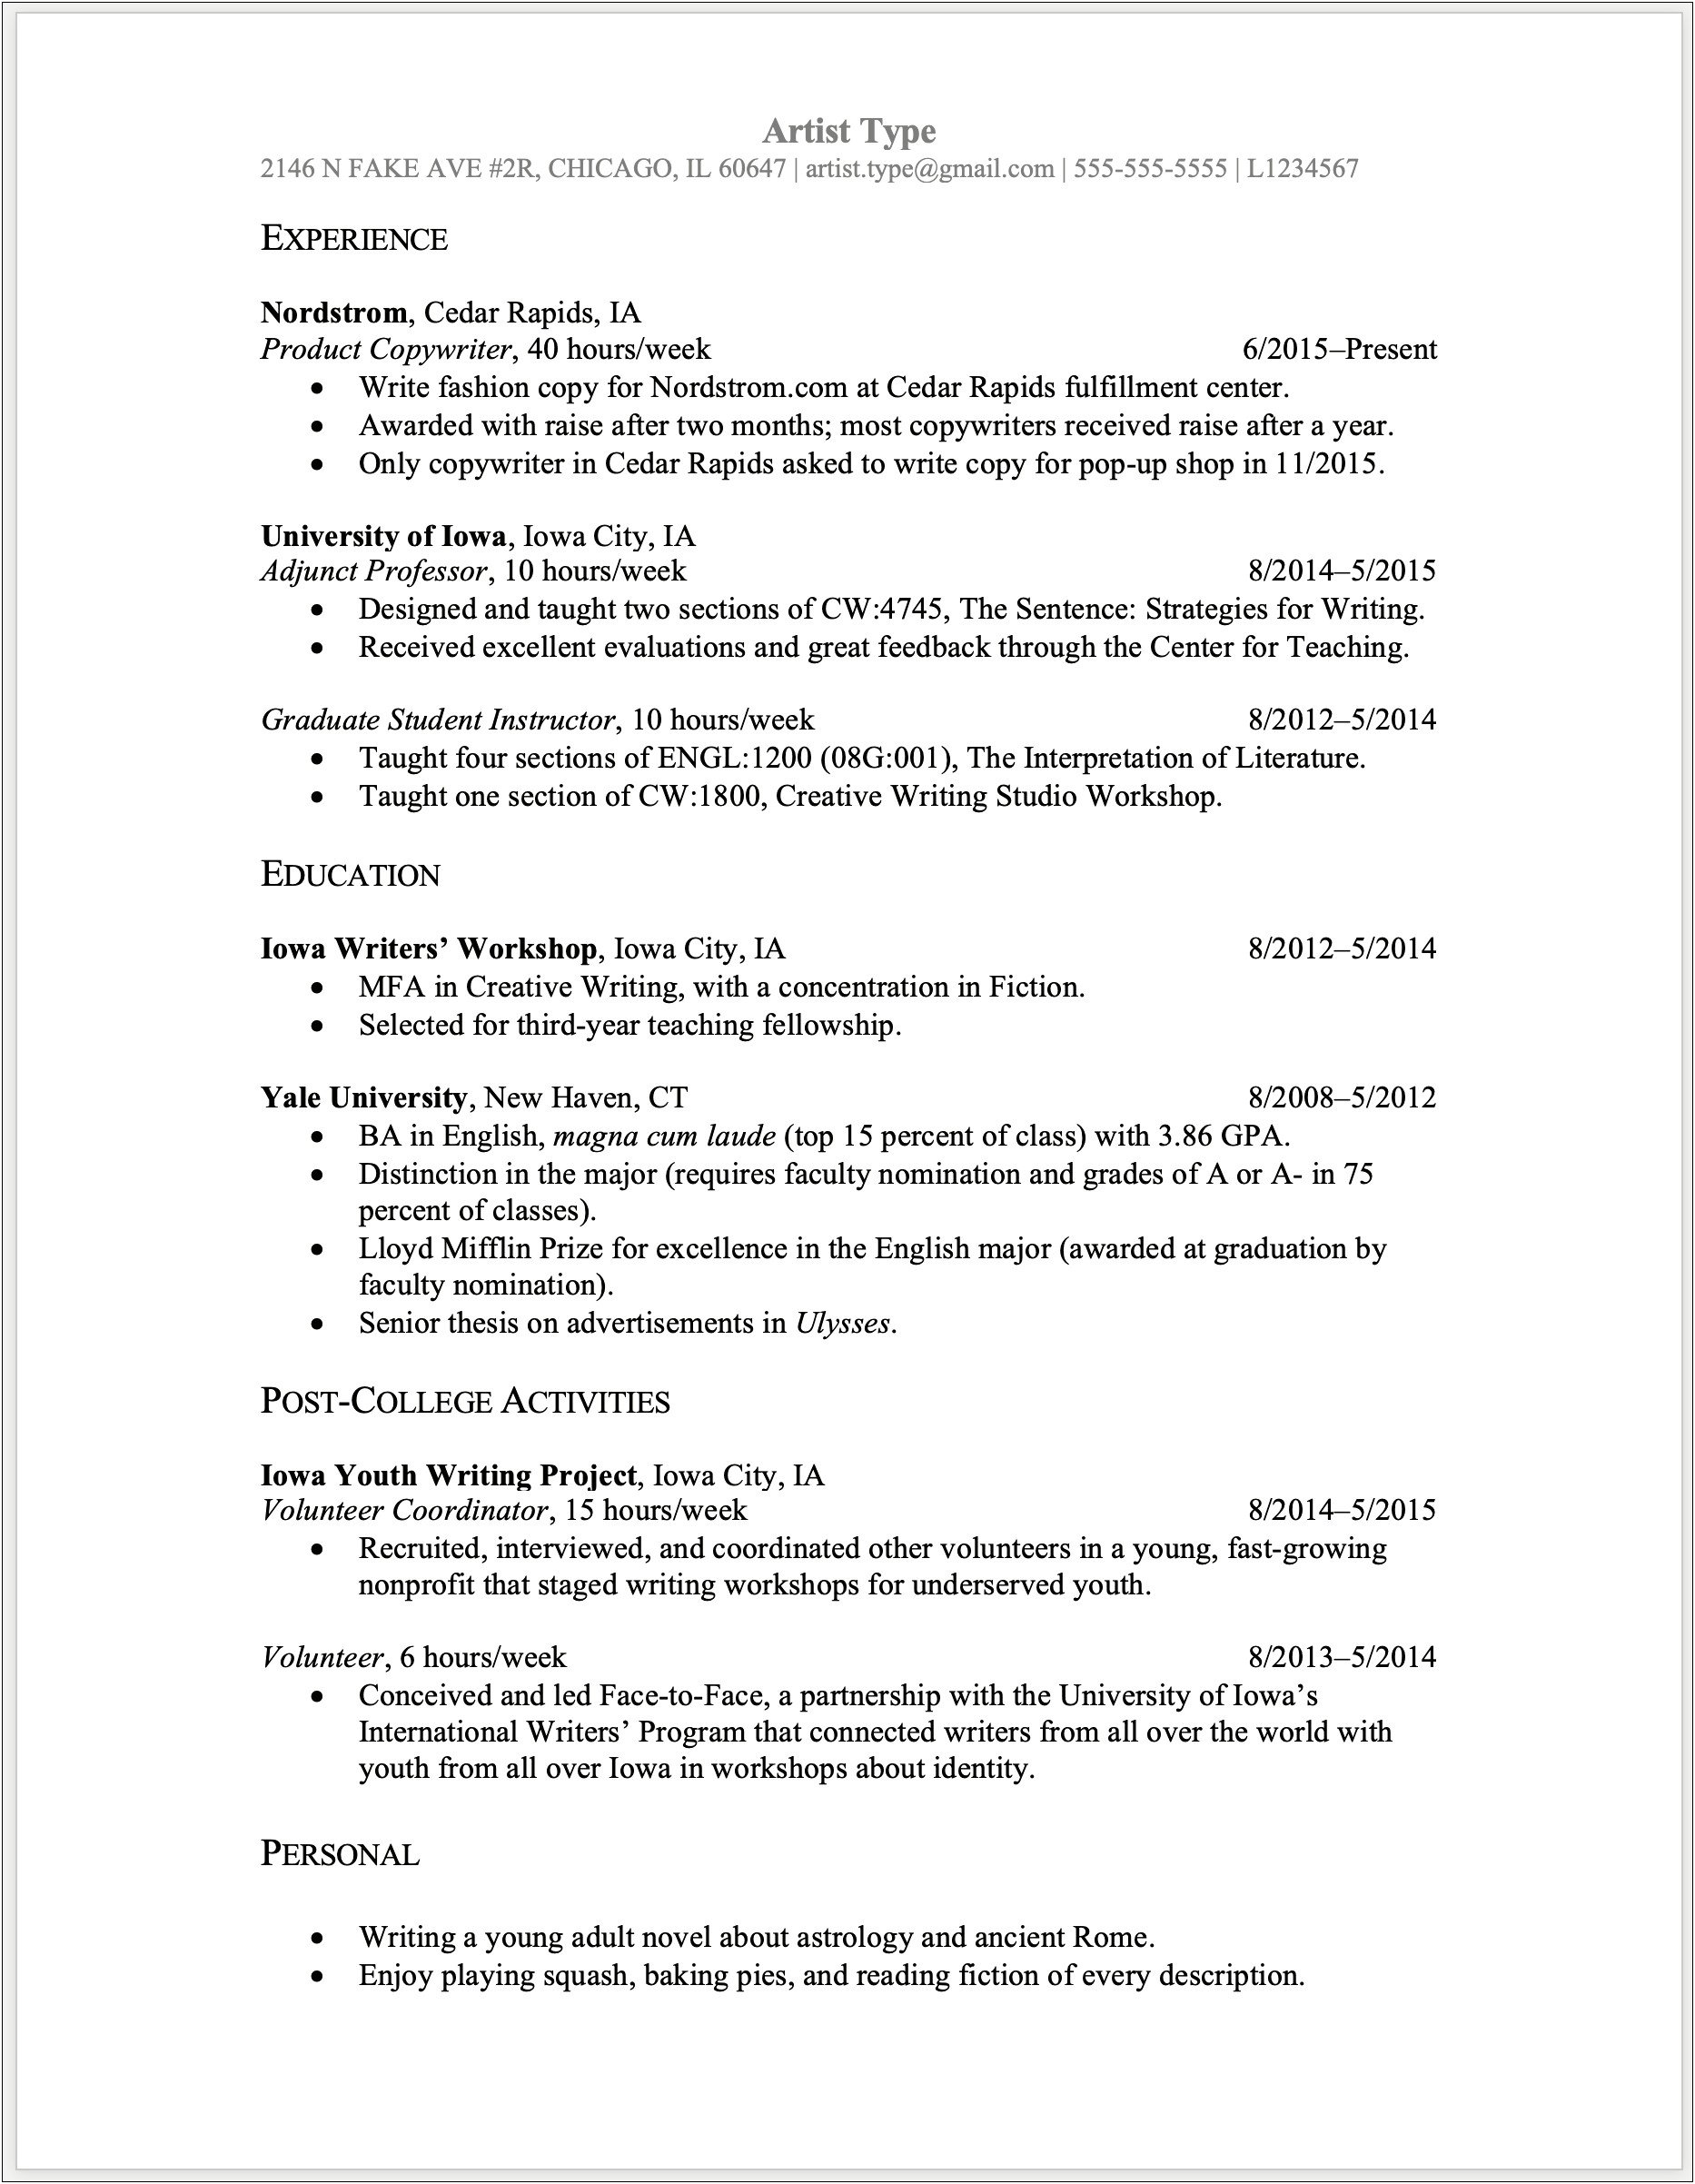 Resume Template For Applying To Graduate School